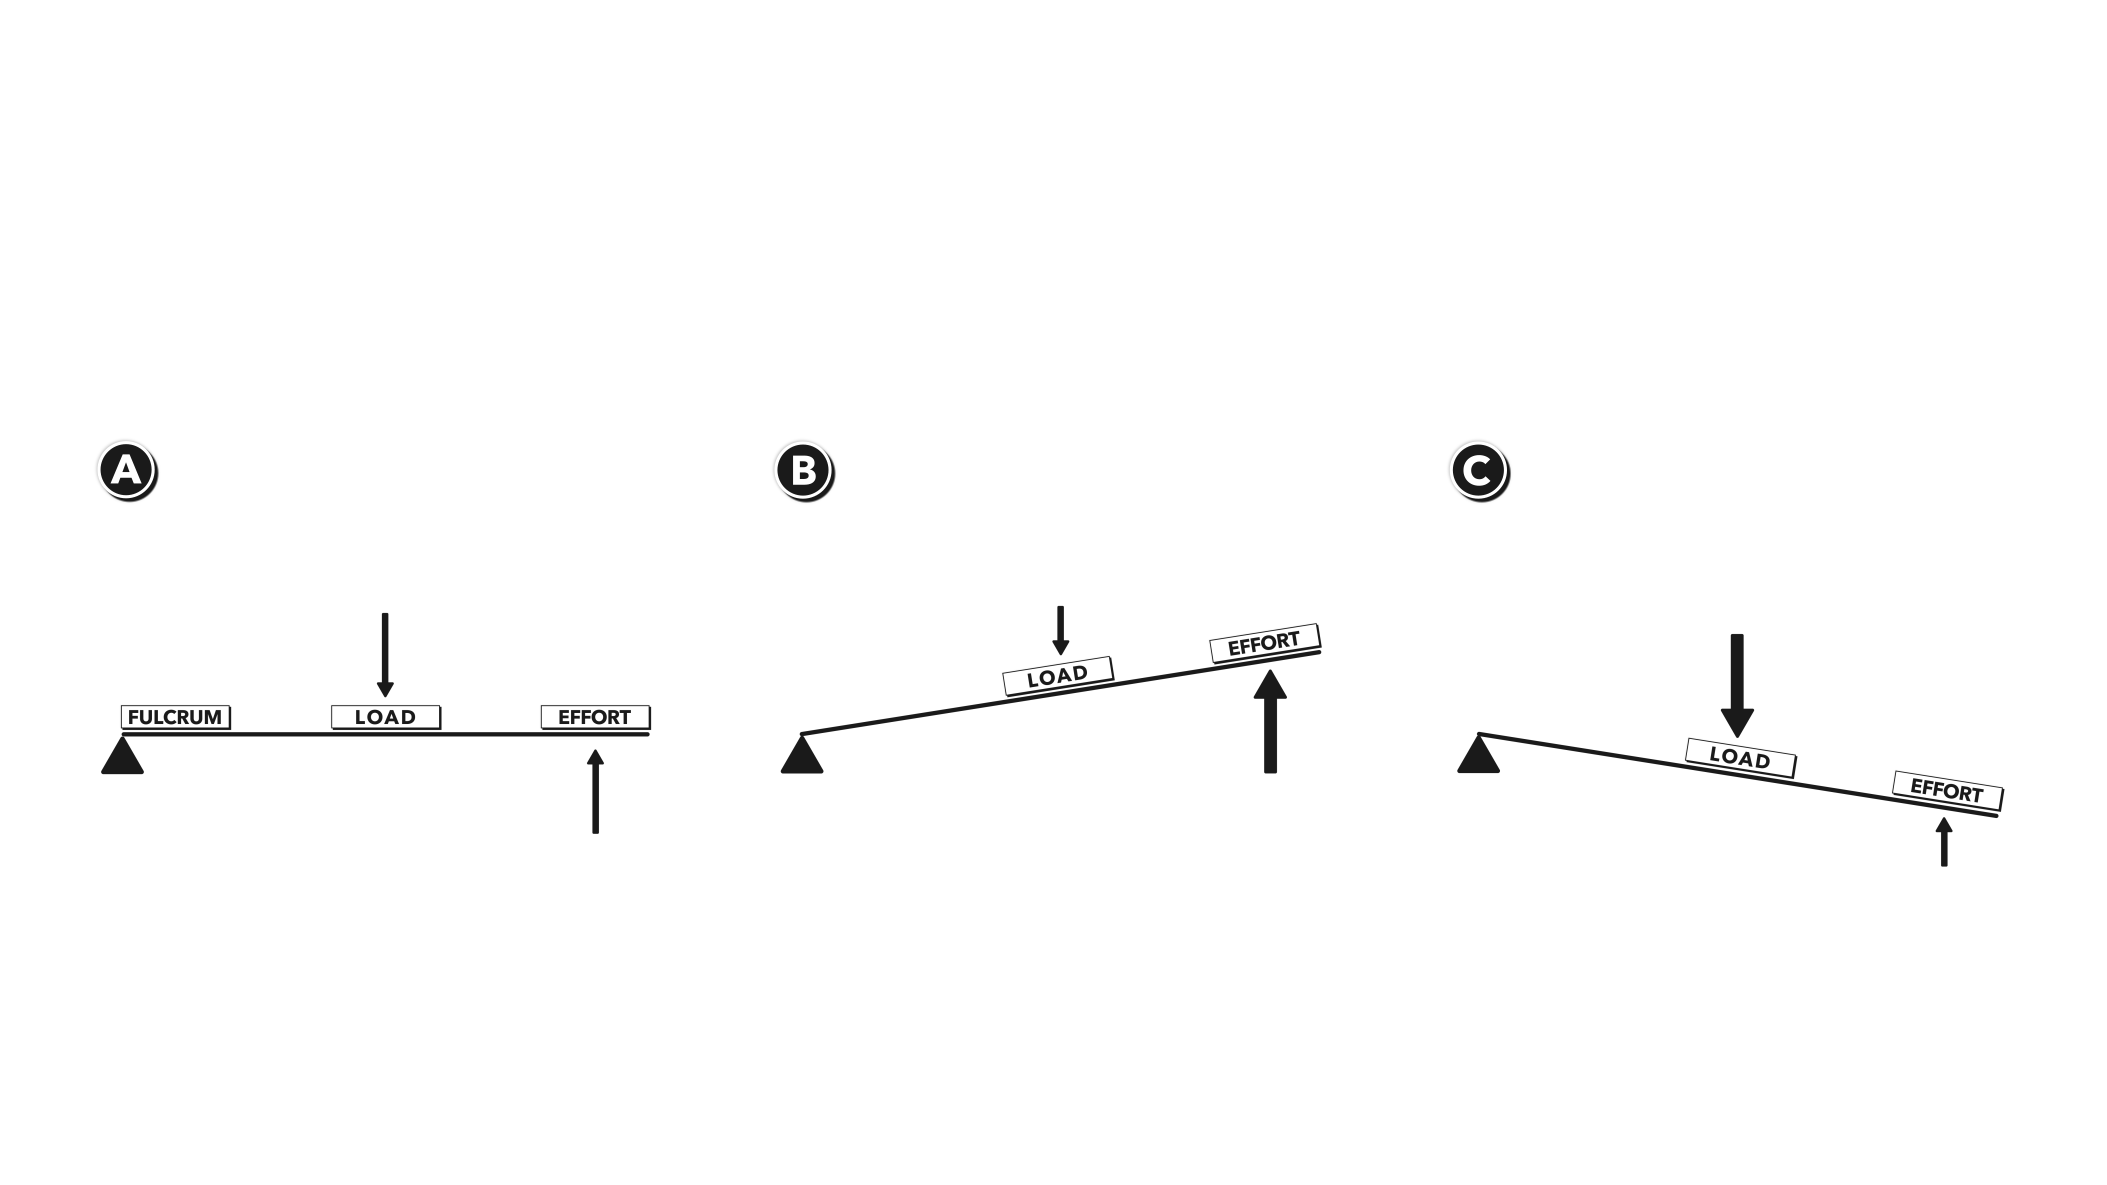 examples of class levers 1 2 and 3